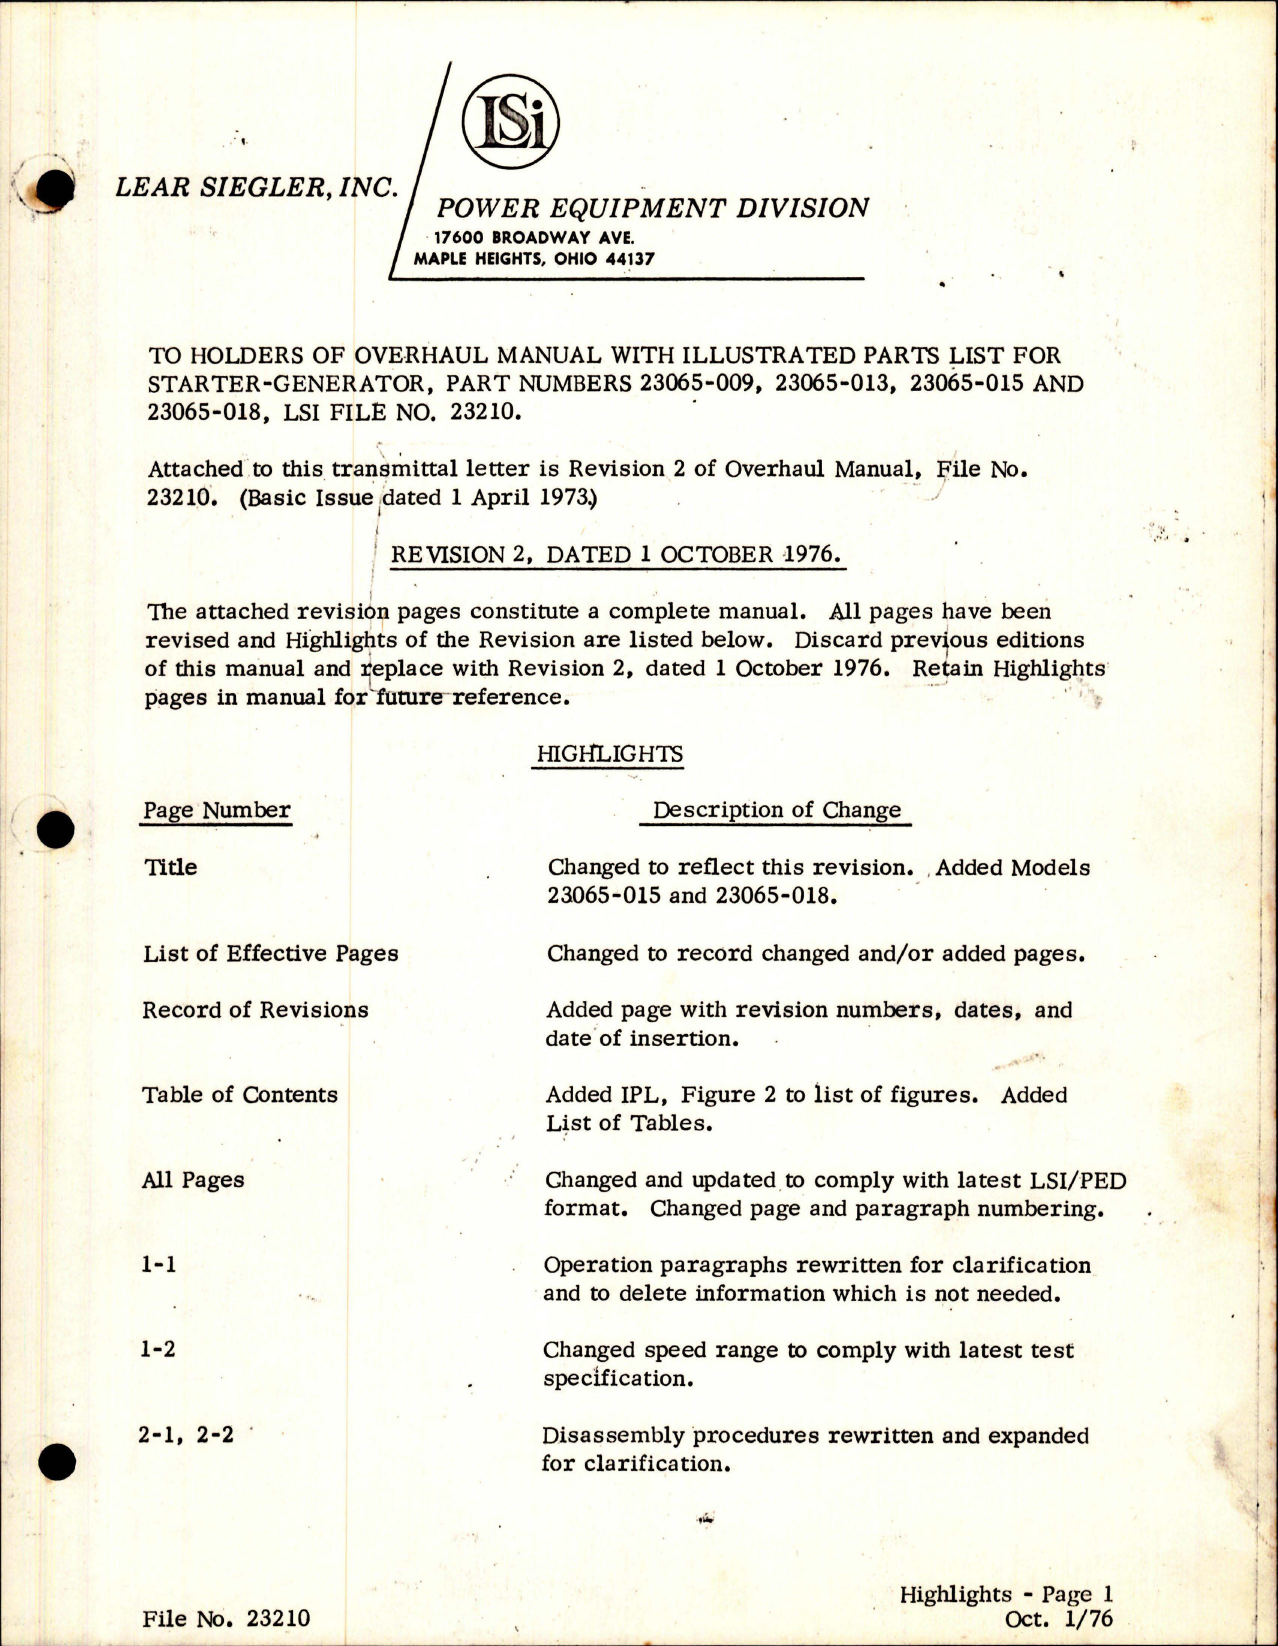 Sample page 1 from AirCorps Library document: Overhaul Manual with Illustrated Parts List for Starter Generator - Revision 2 